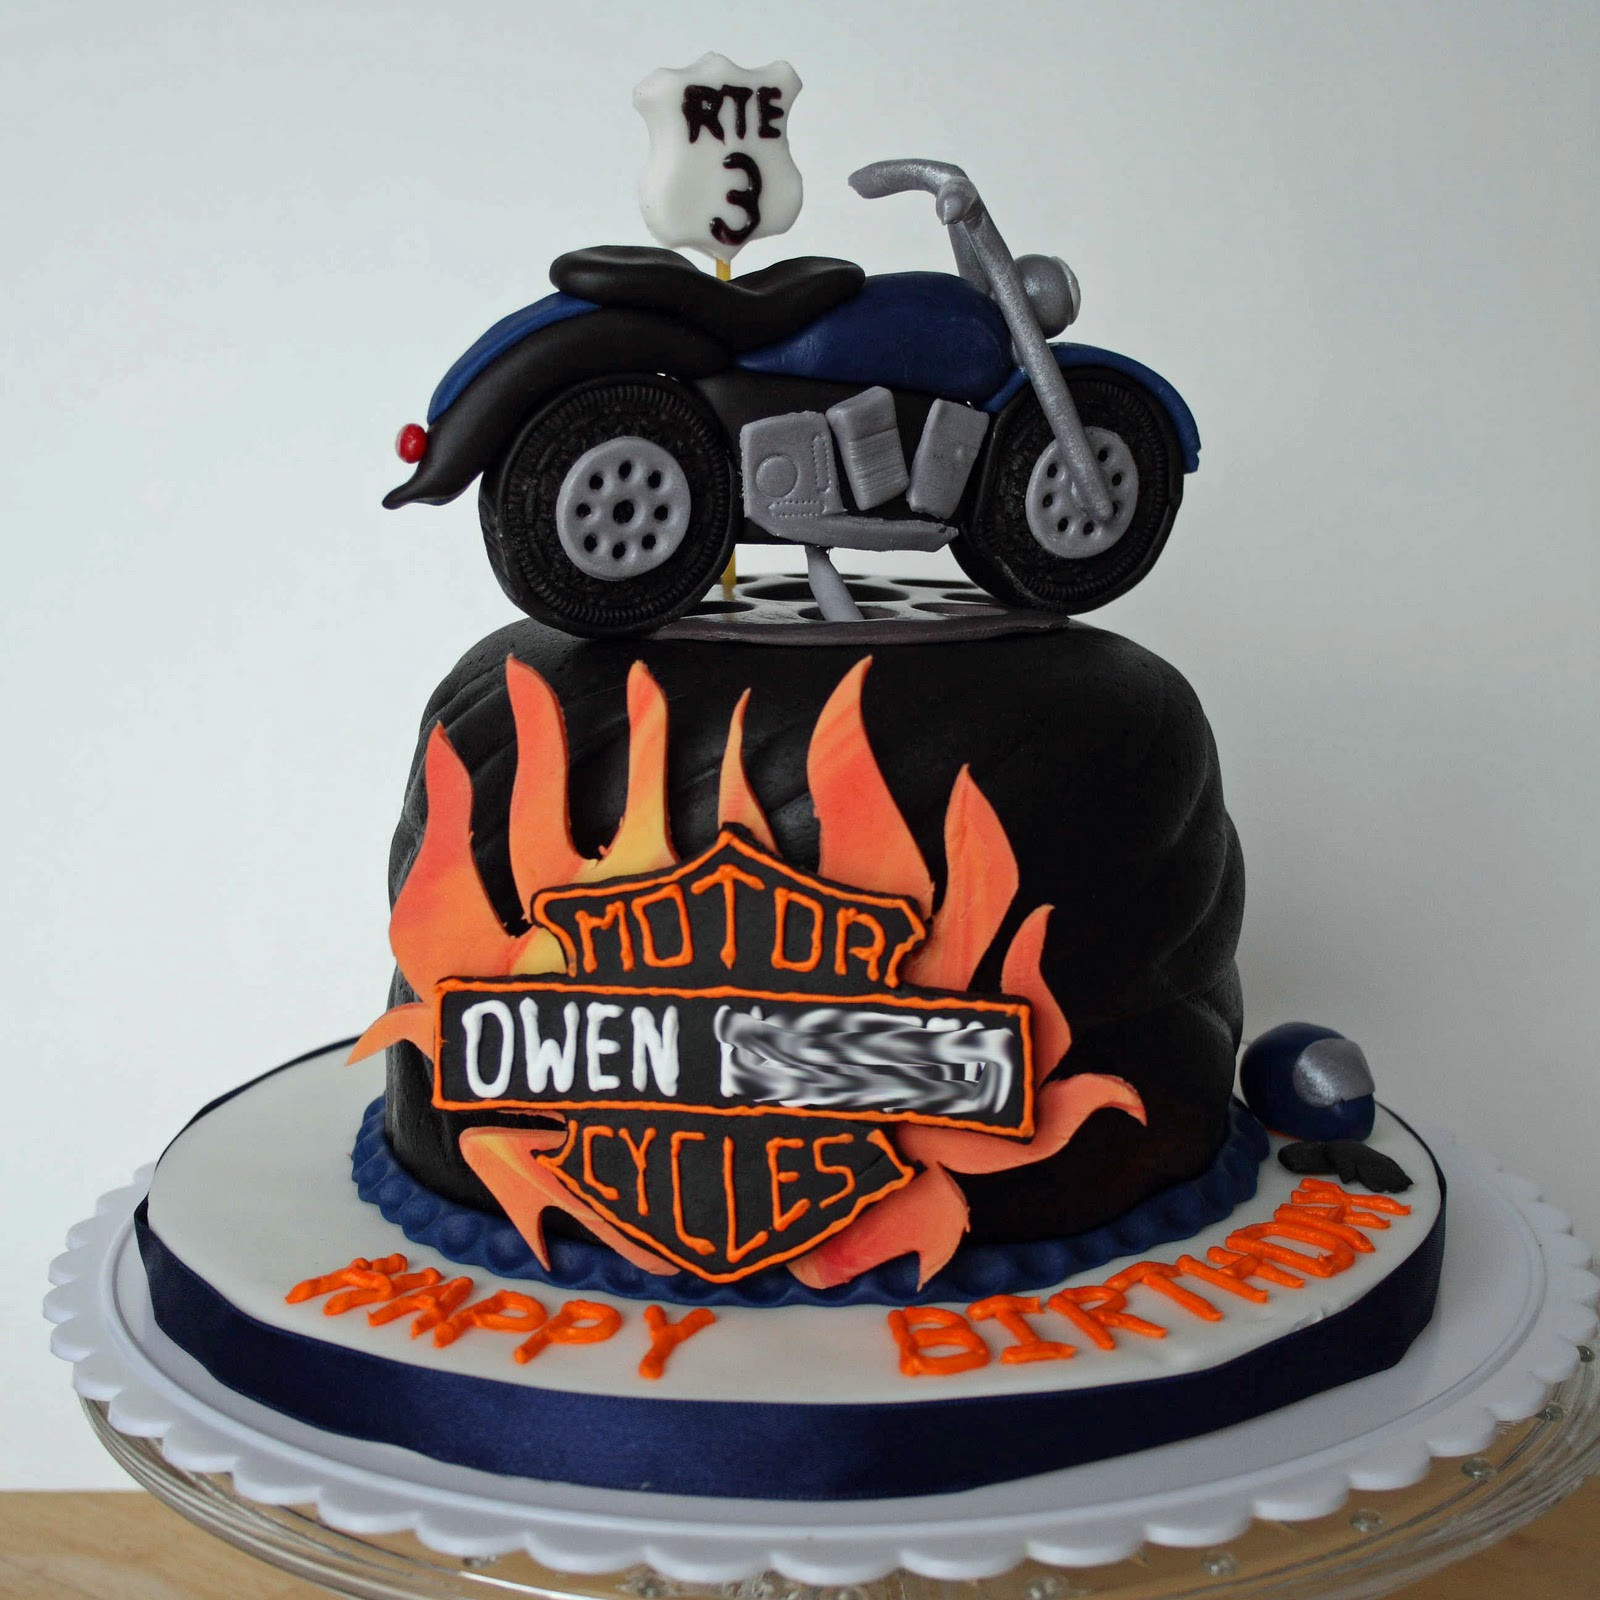 Motorcycle Birthday Cakes
 All Kinds of Sugar Motorcycle Birthday Cake